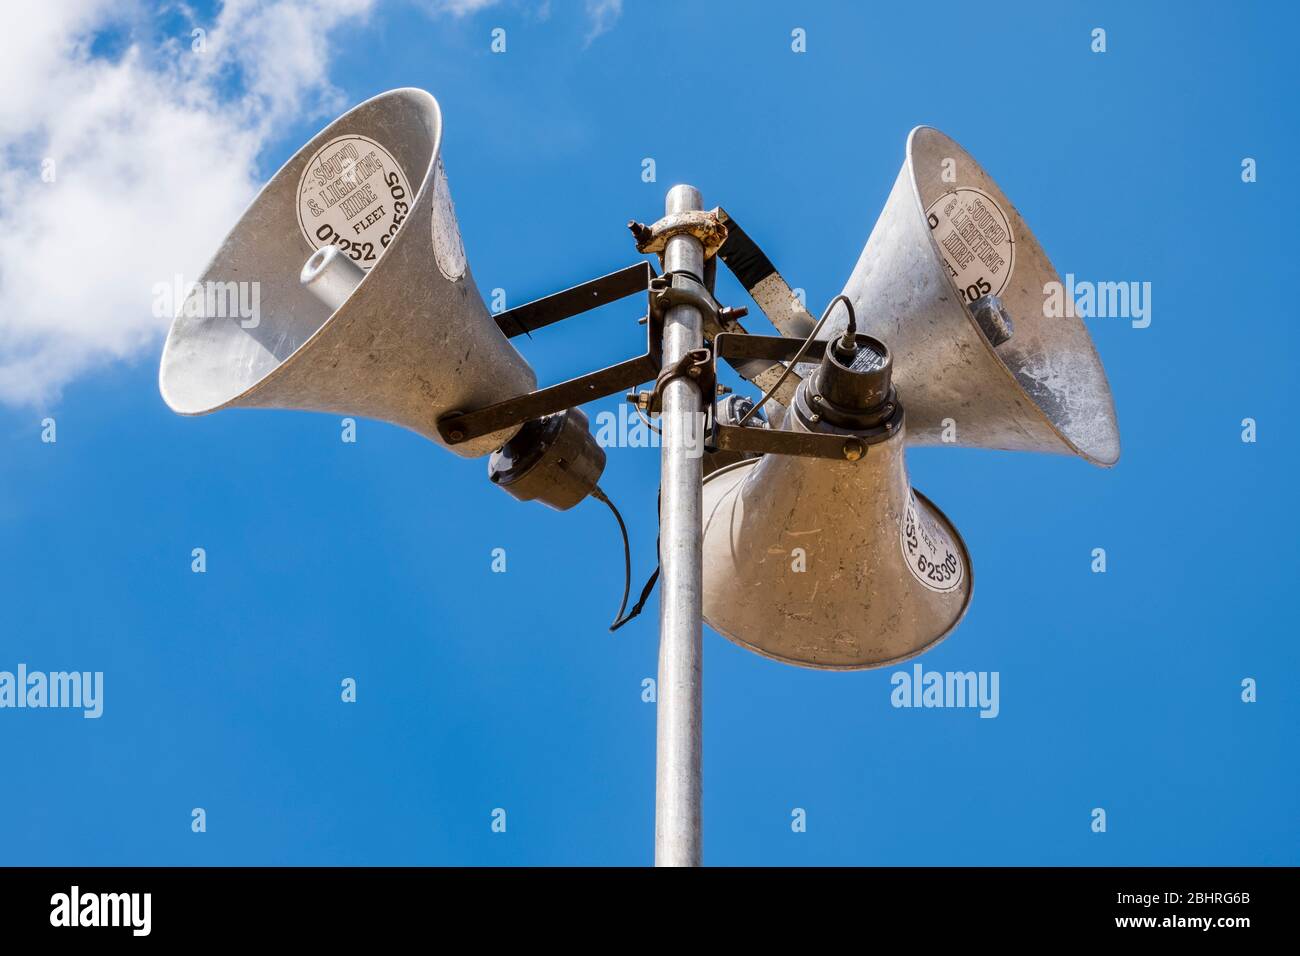 Public Address System, PA Speakers mounted on a pole outside at a public fair Stock Photo